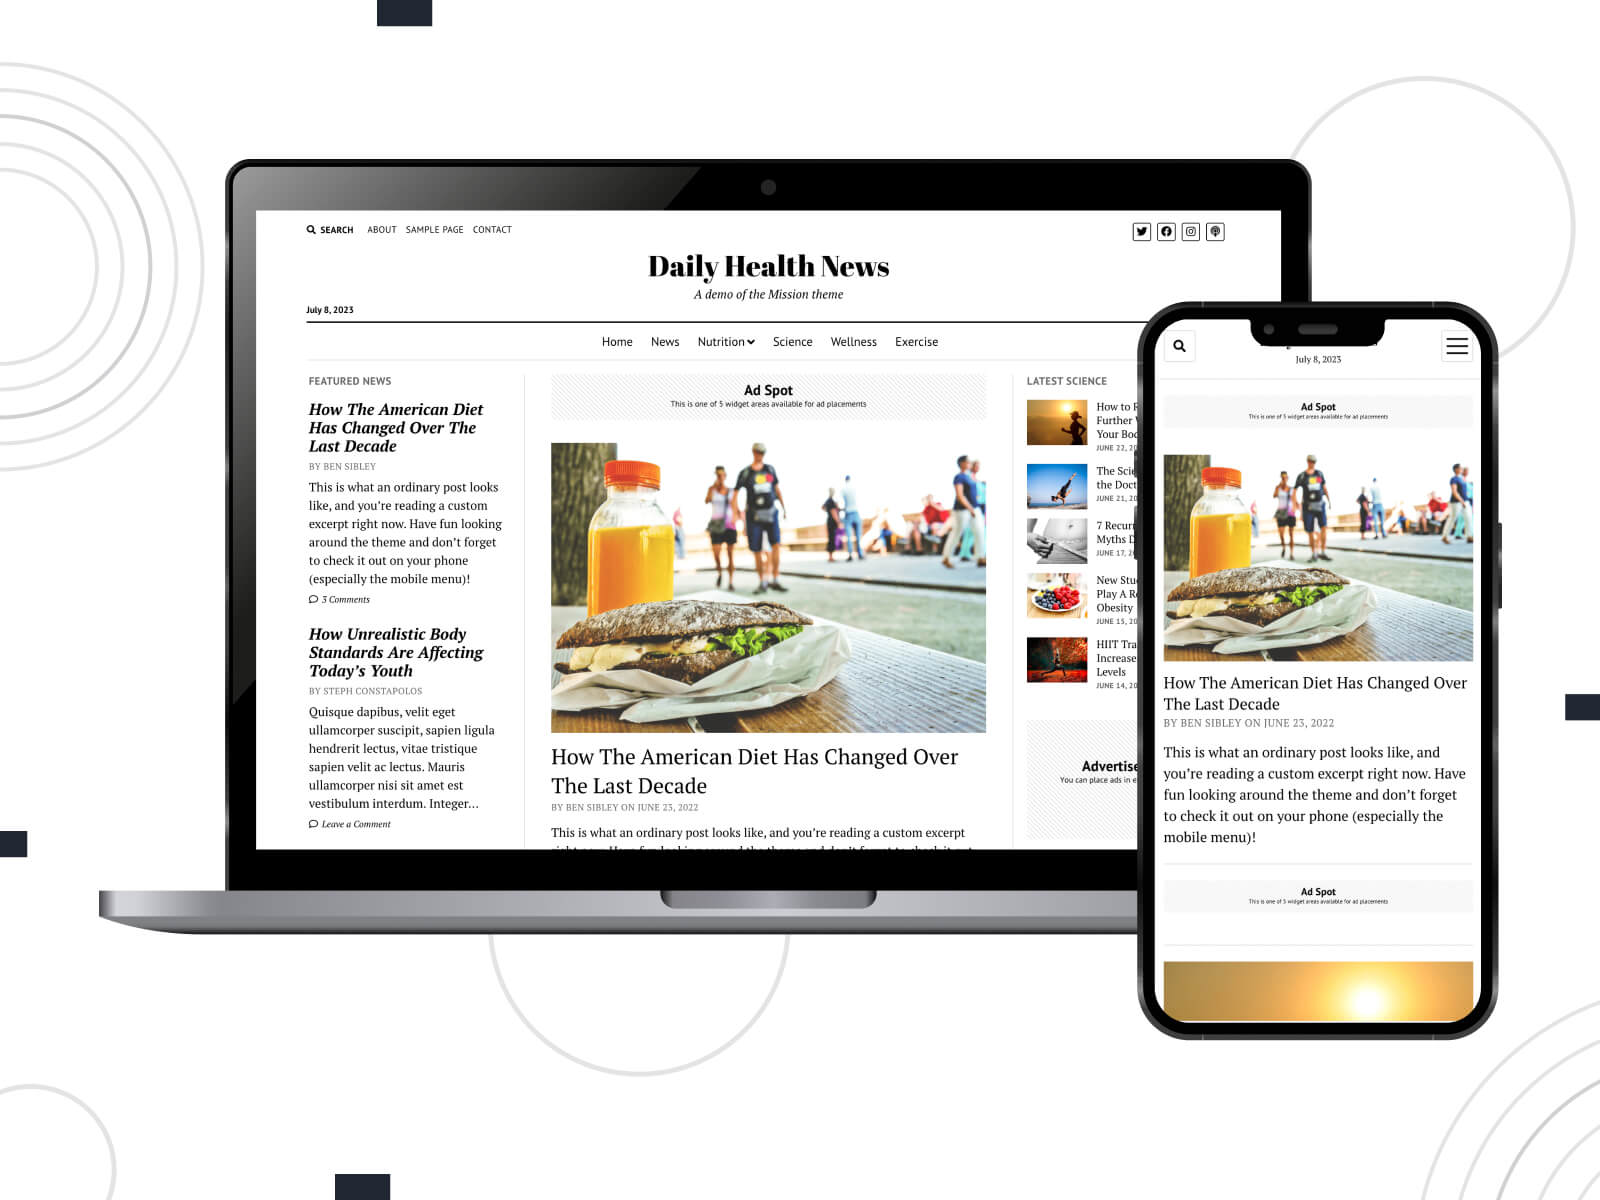 Snapshot of Mission News - SEO-friendly magazine theme tailored for news articles and blog publications in sienna, wheat, burlywood, goldenrod, and peru color gradation